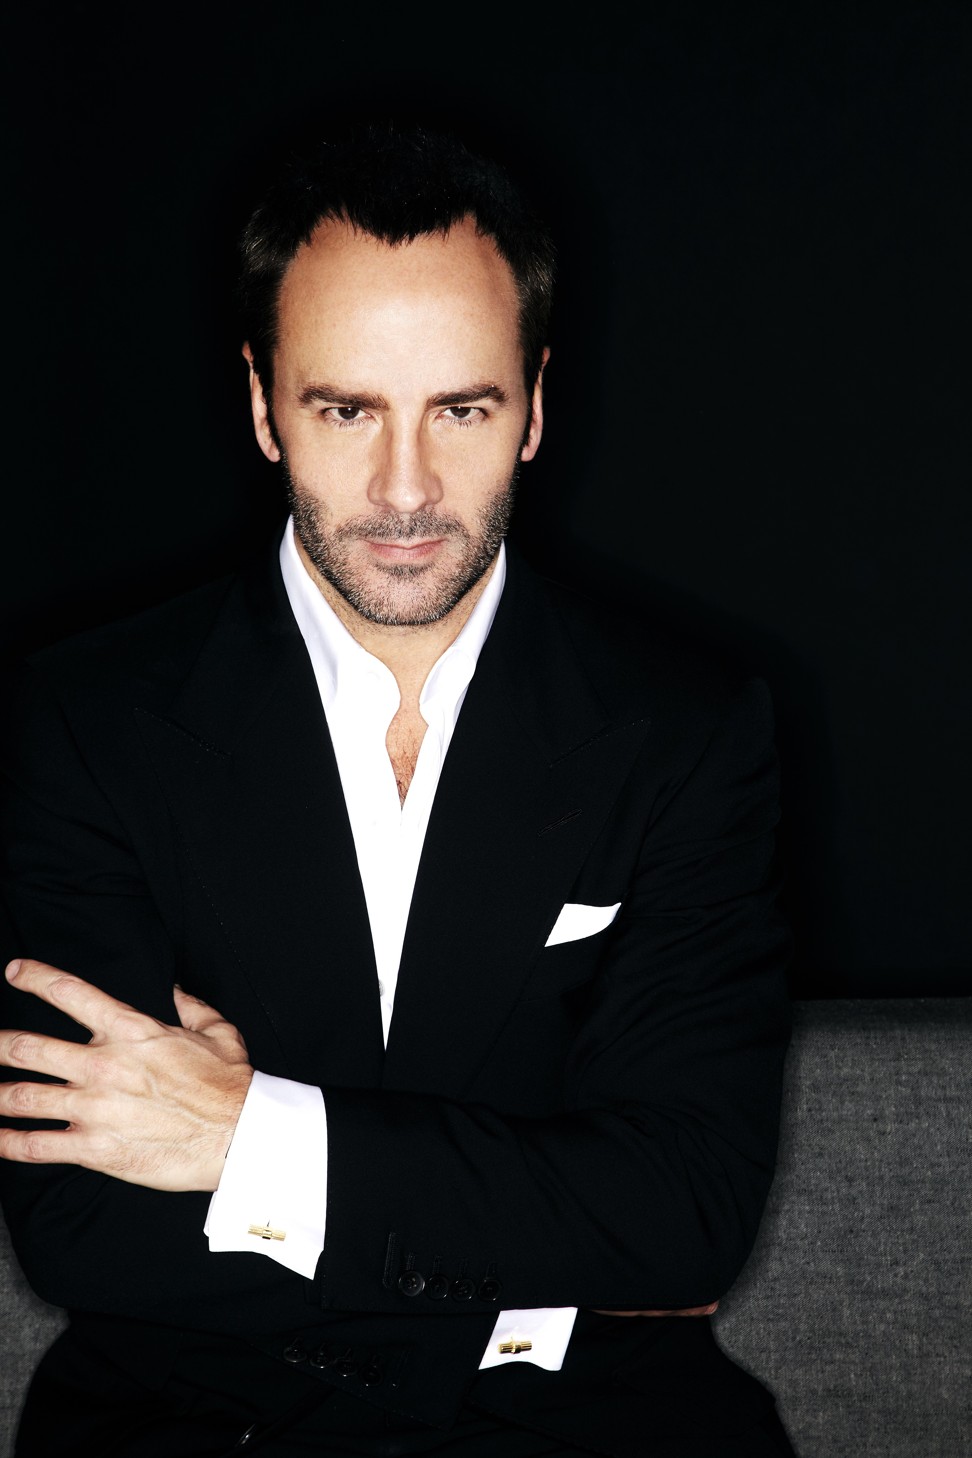 Designer Tom Ford decided to adopt a vegan lifestyle after watching a hard-hitting documentary.